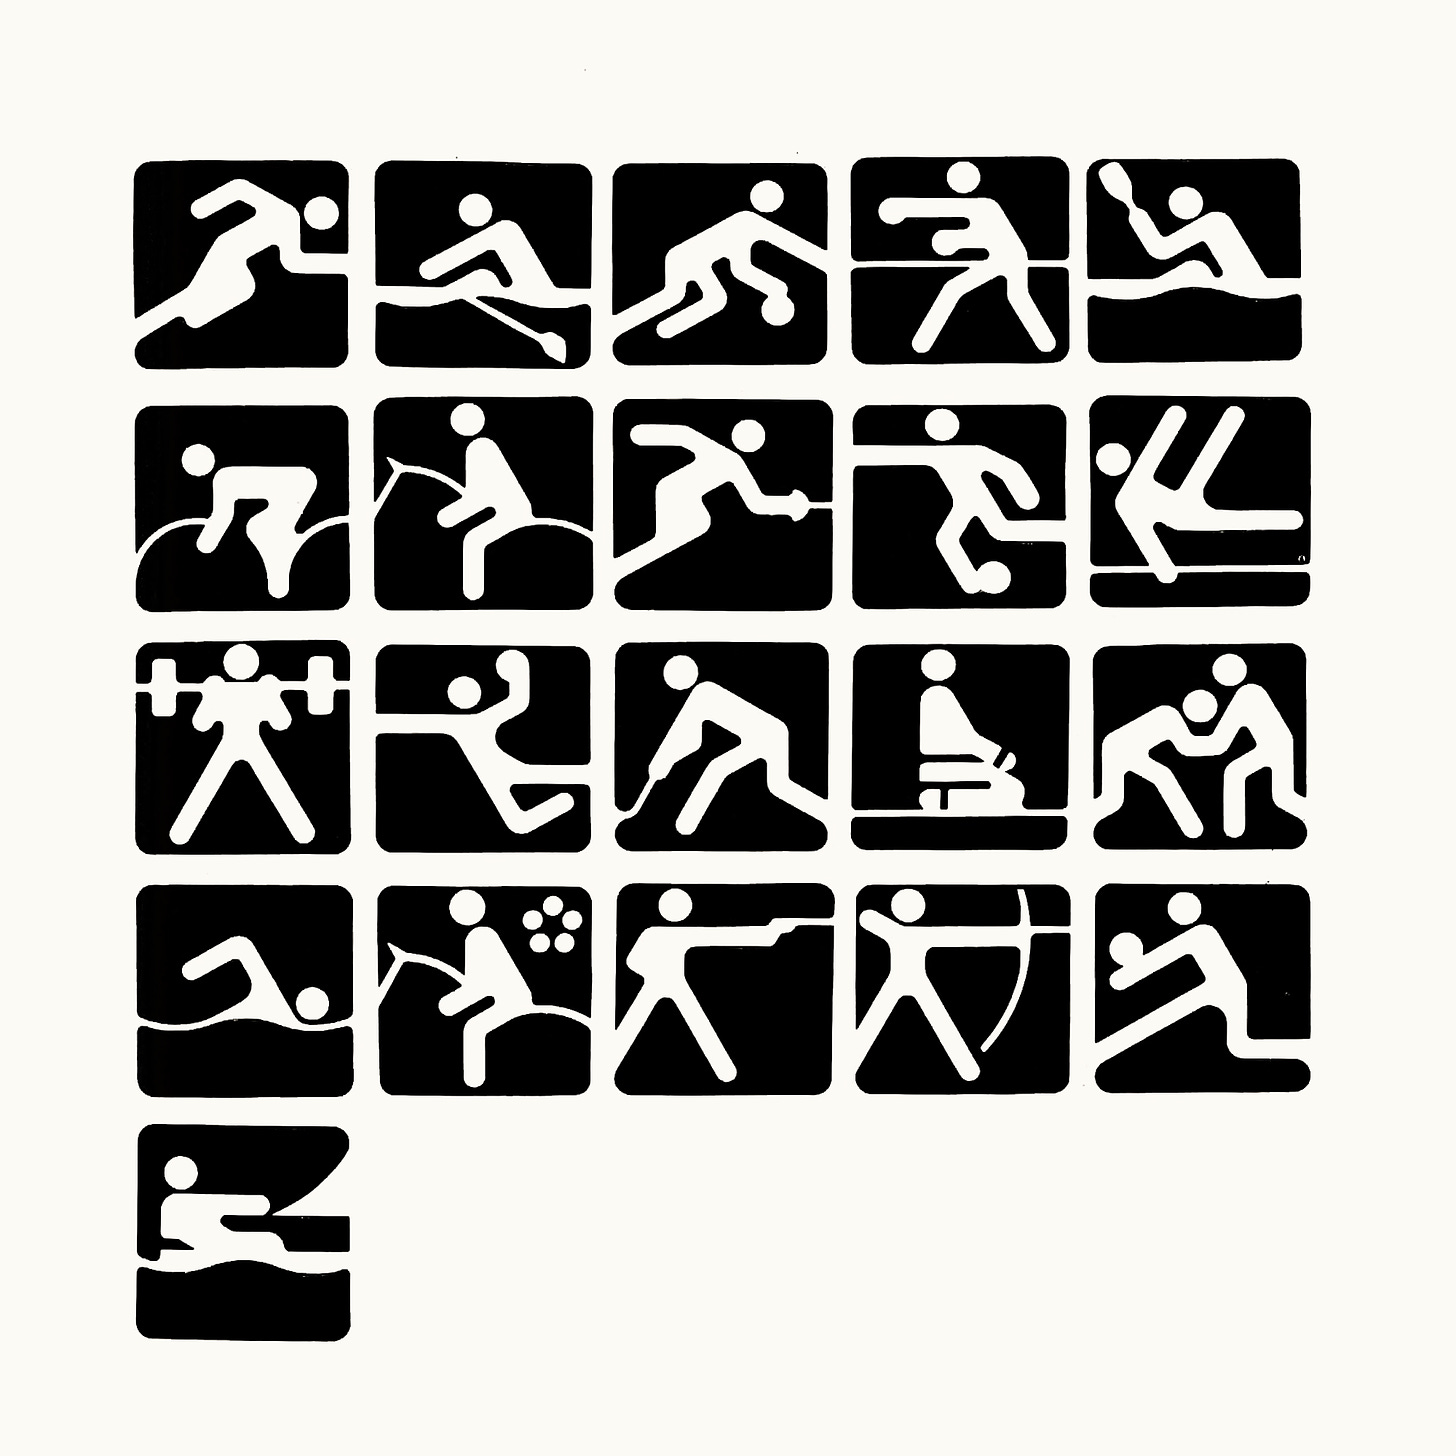 Moscow 1980 Summer Olympic Games, pictograms